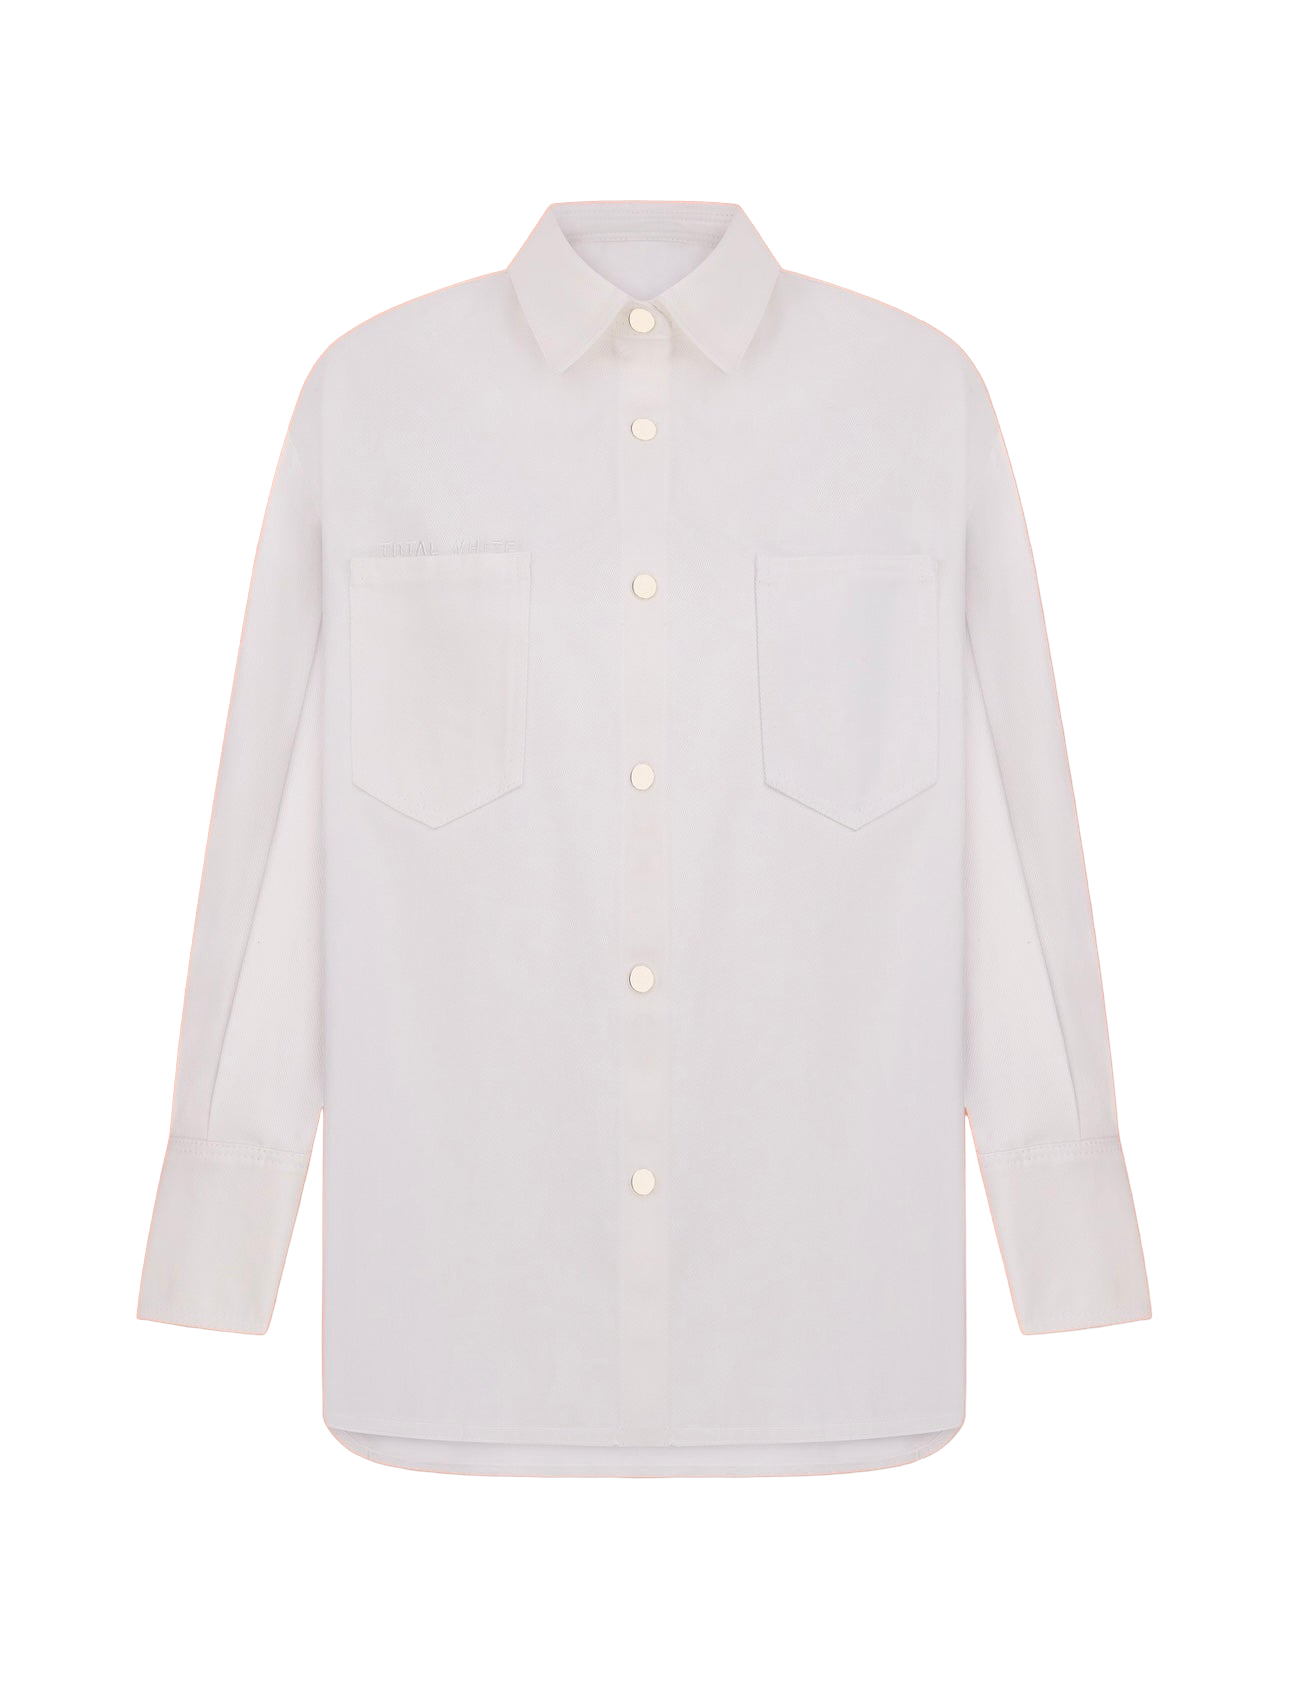 Total White Denim Shirt In Red